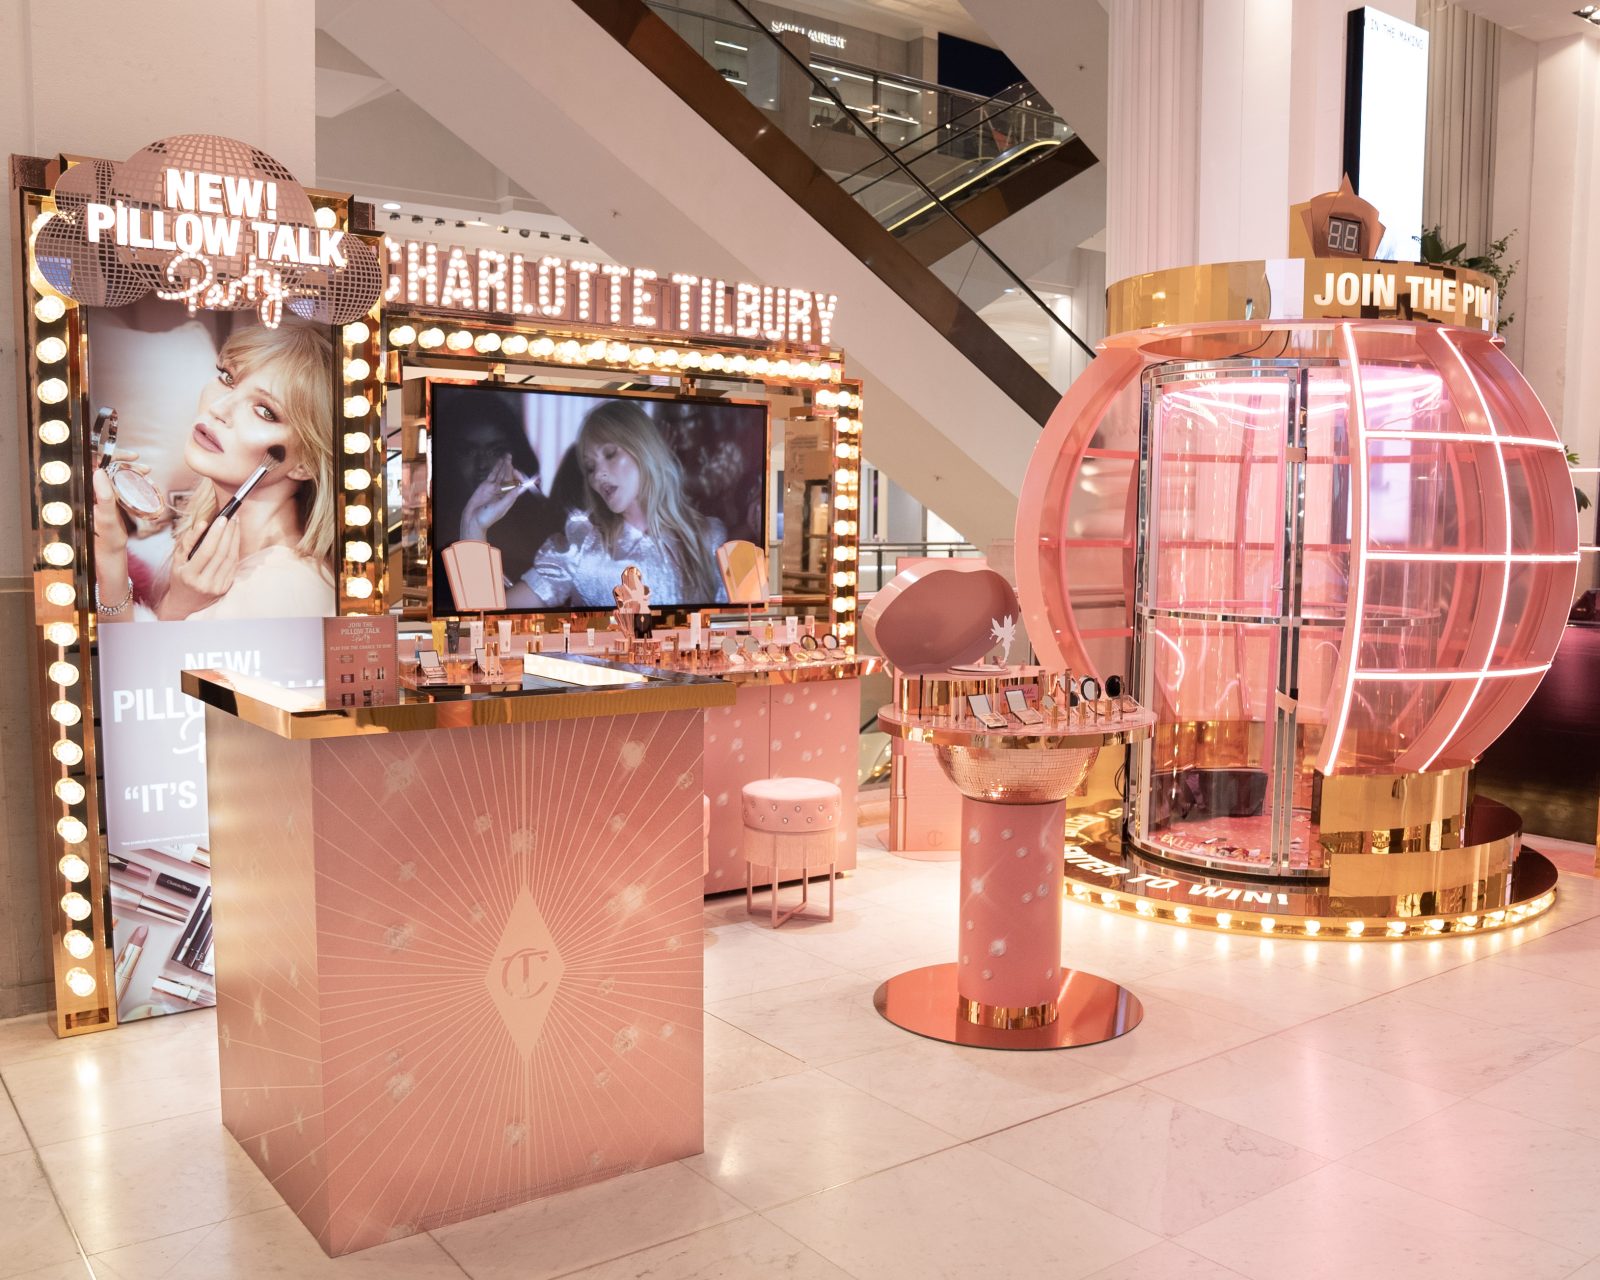 A three-day beauty event is taking over the Trafford Centre this weekend, The Manc